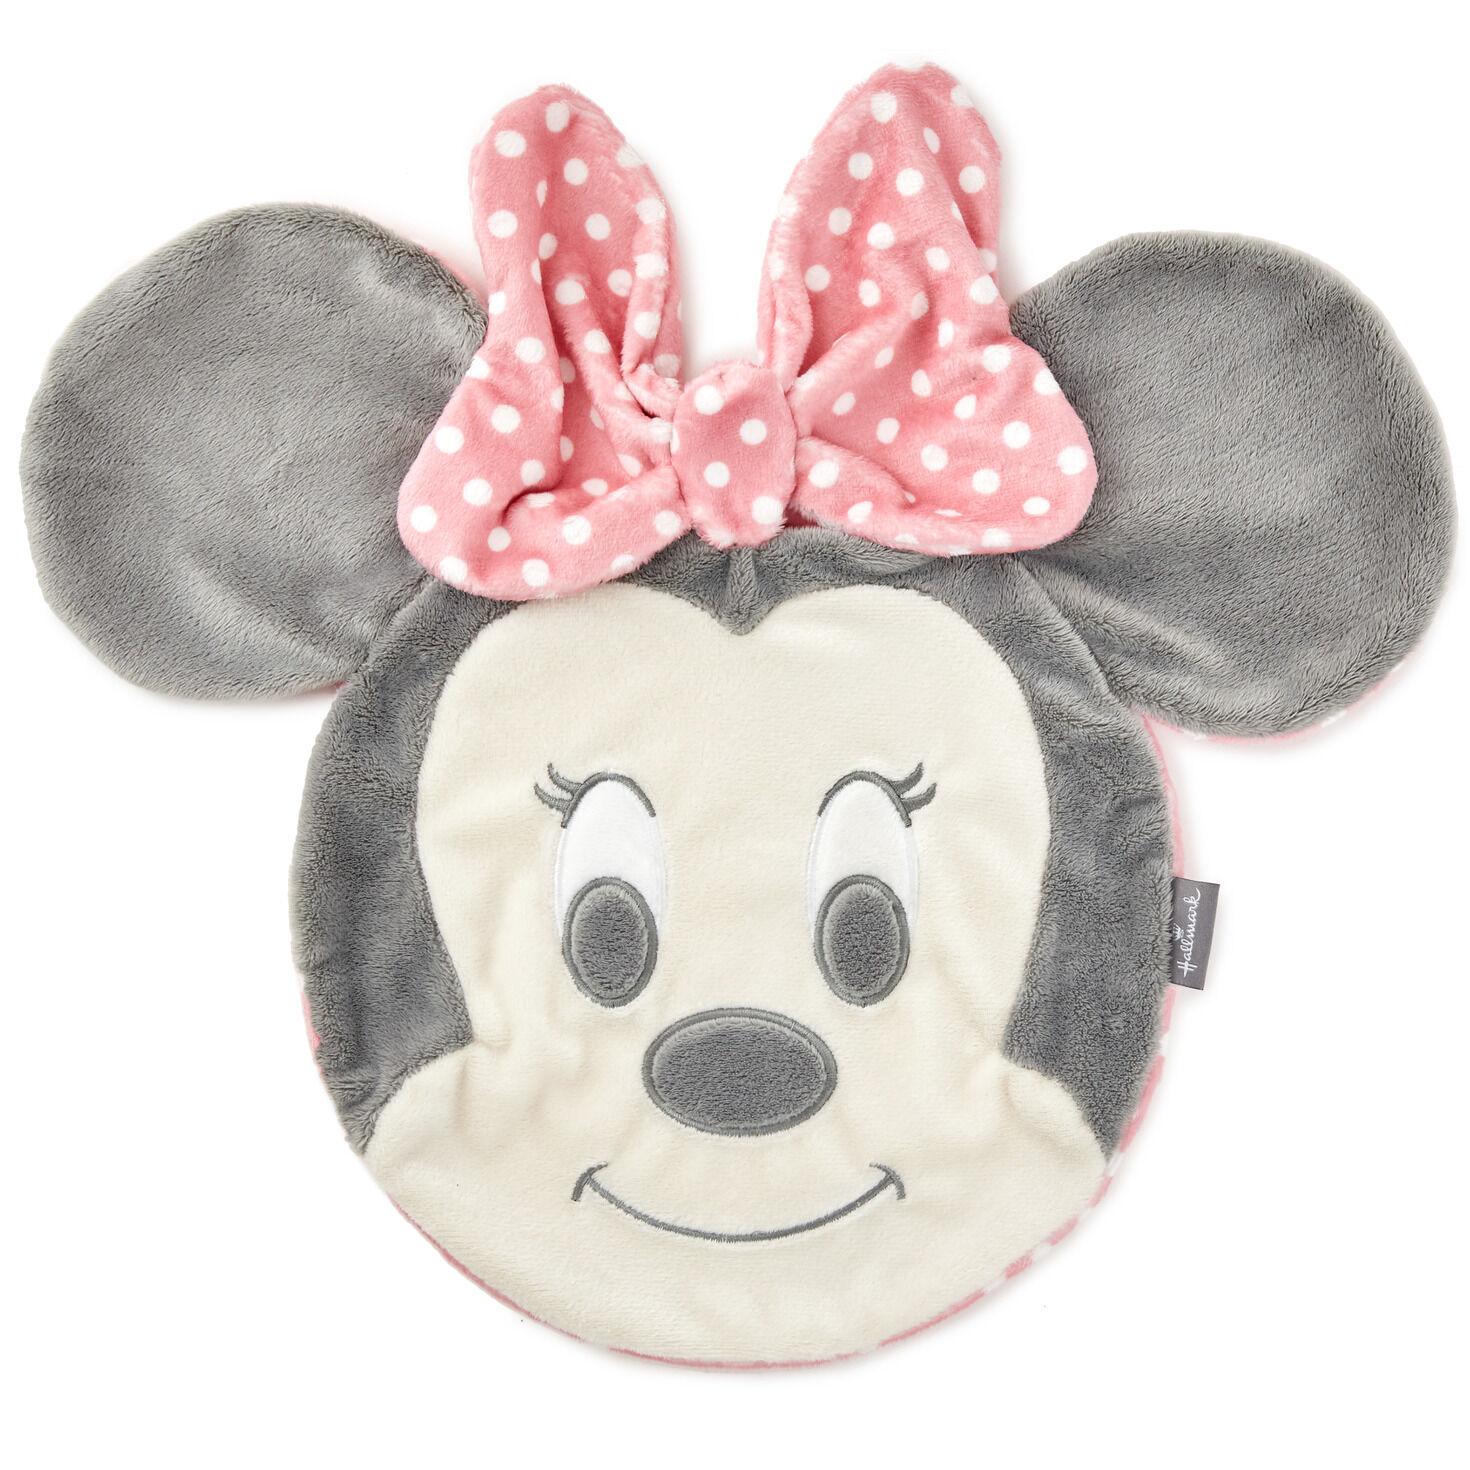 NEW Disney Baby Minnie Mouse Cute Bow Jiggler Rattle *FREE AU SHIPPING!* 